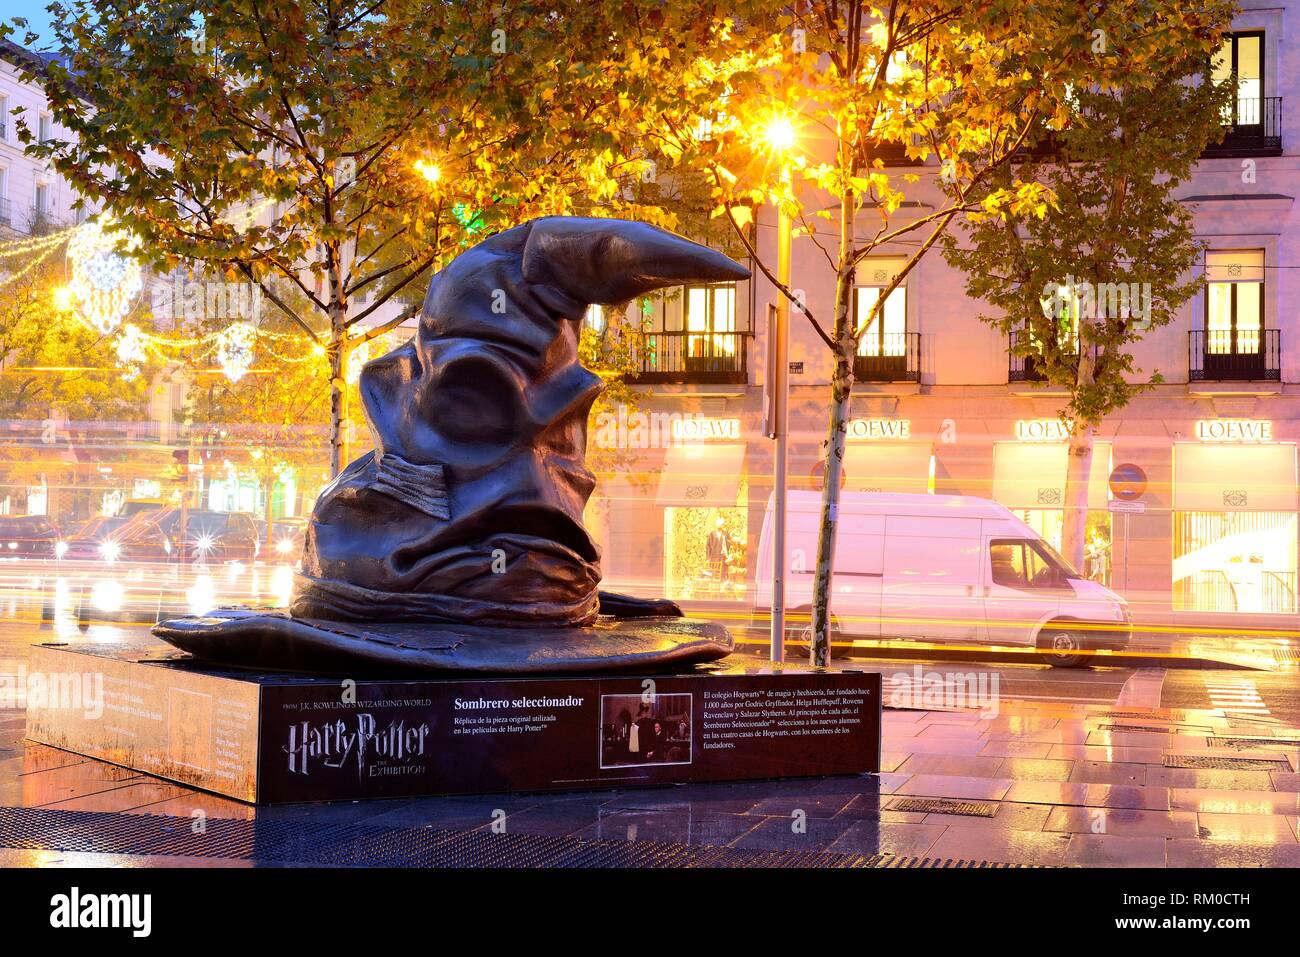 The Sorting Hat of Harry Potter sculpture in Madrid, Spain Stock Photo -  Alamy